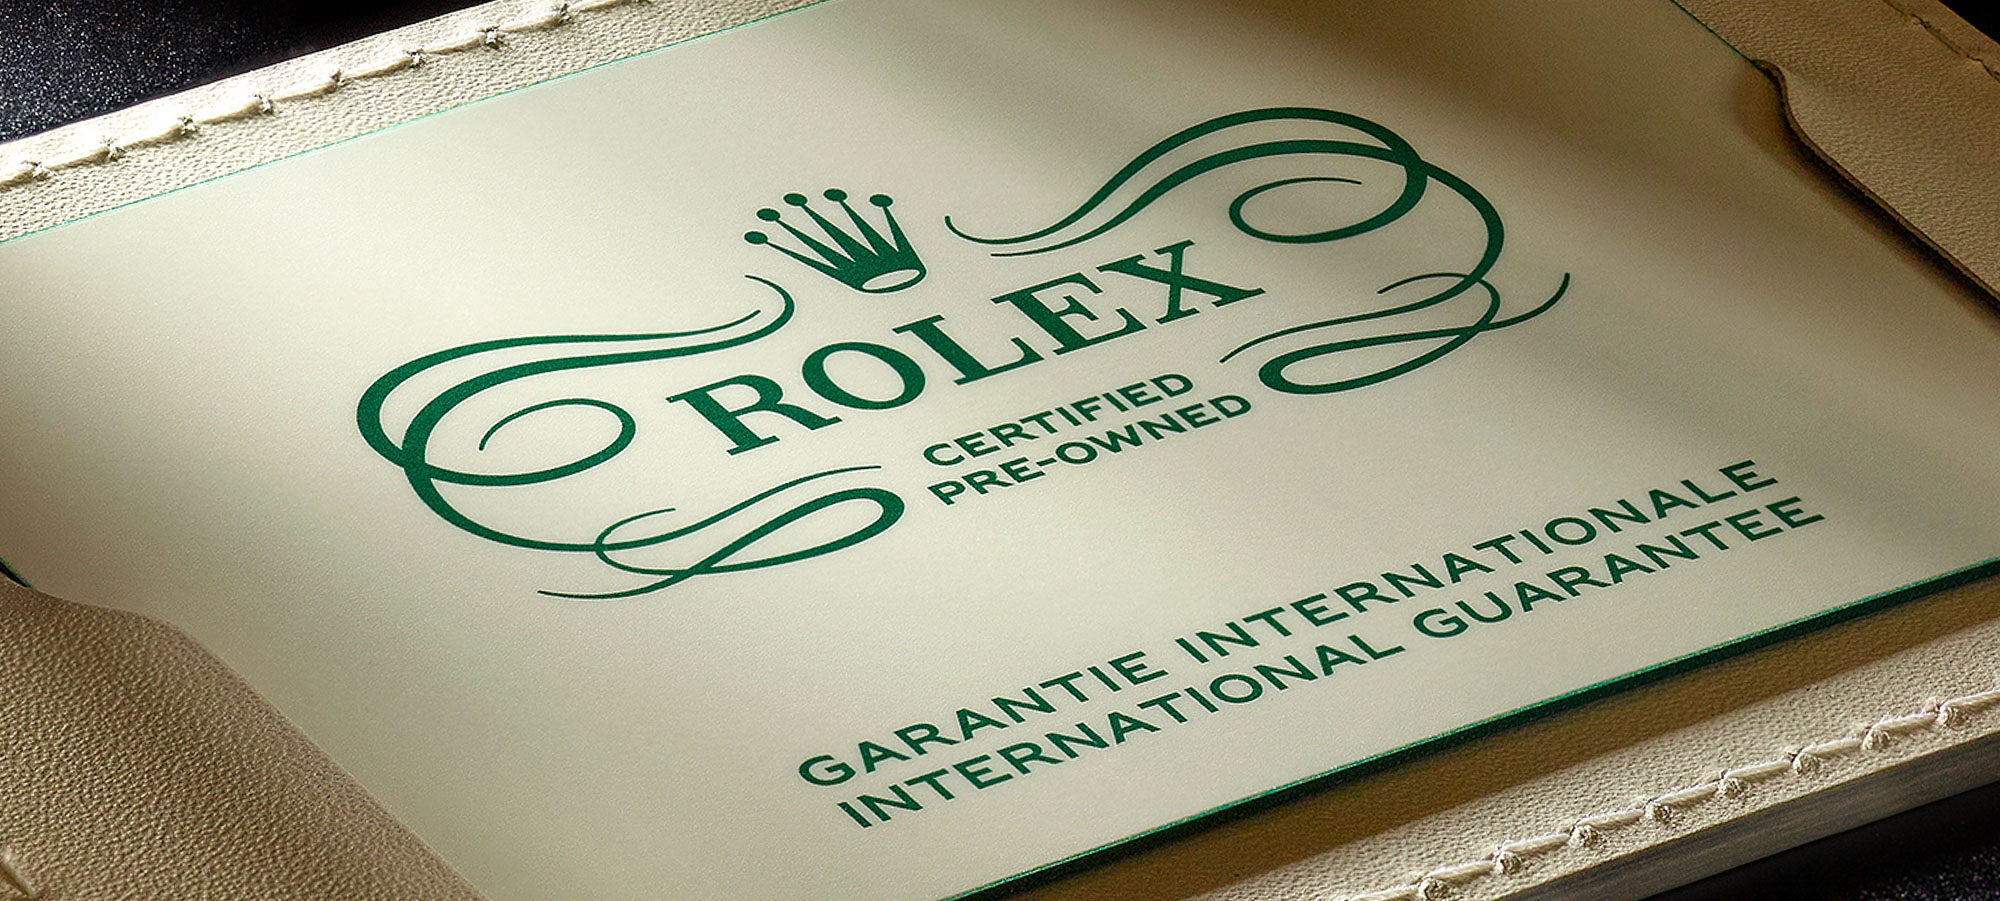 Rolex Launches Its "Rolex Certified Pre-Owned" Watch Program